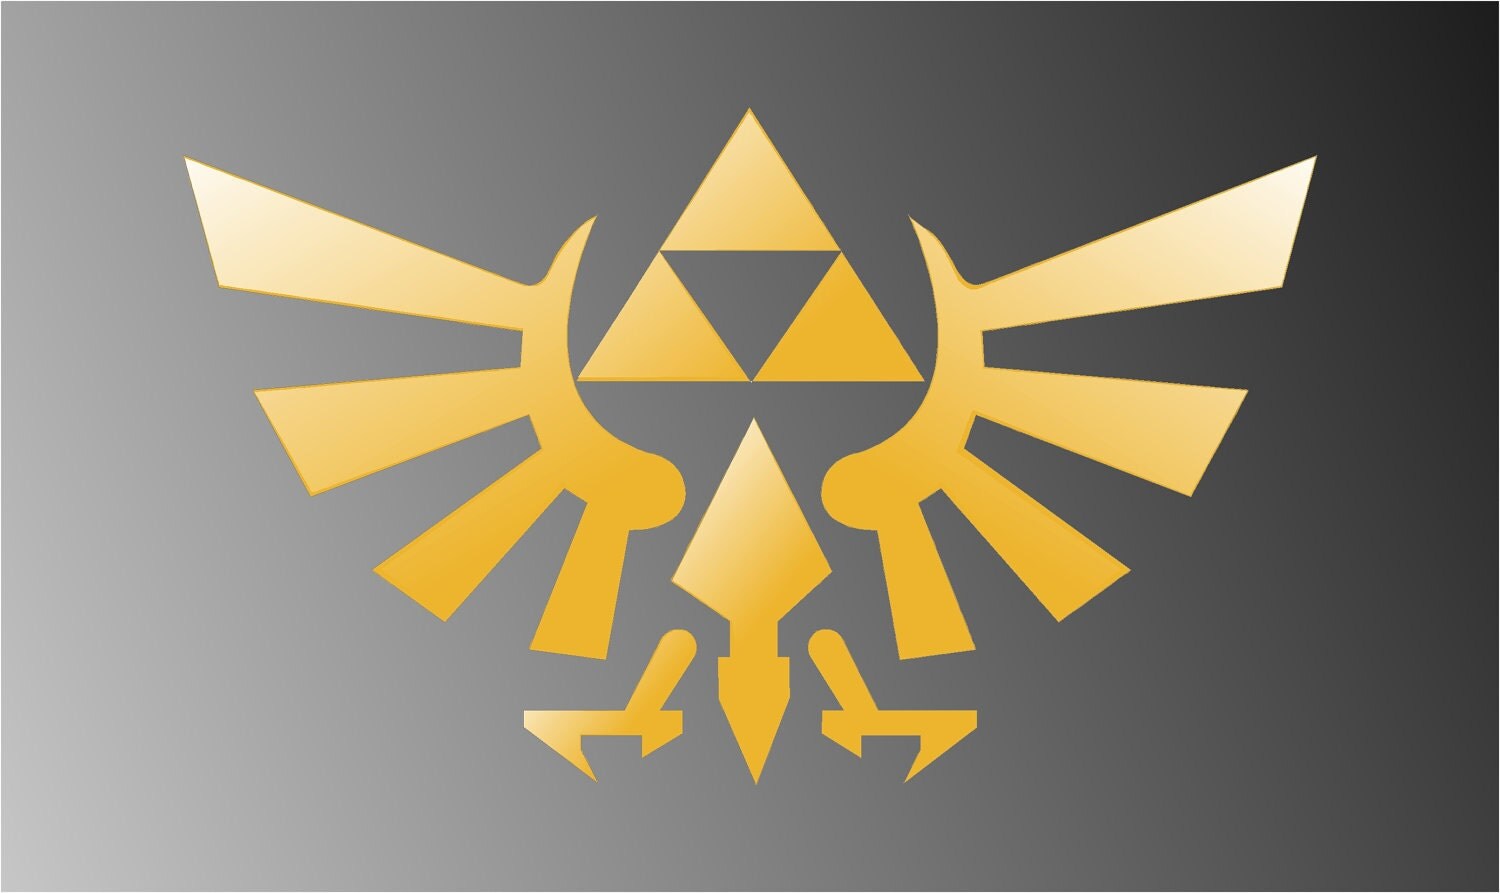 triforce decal